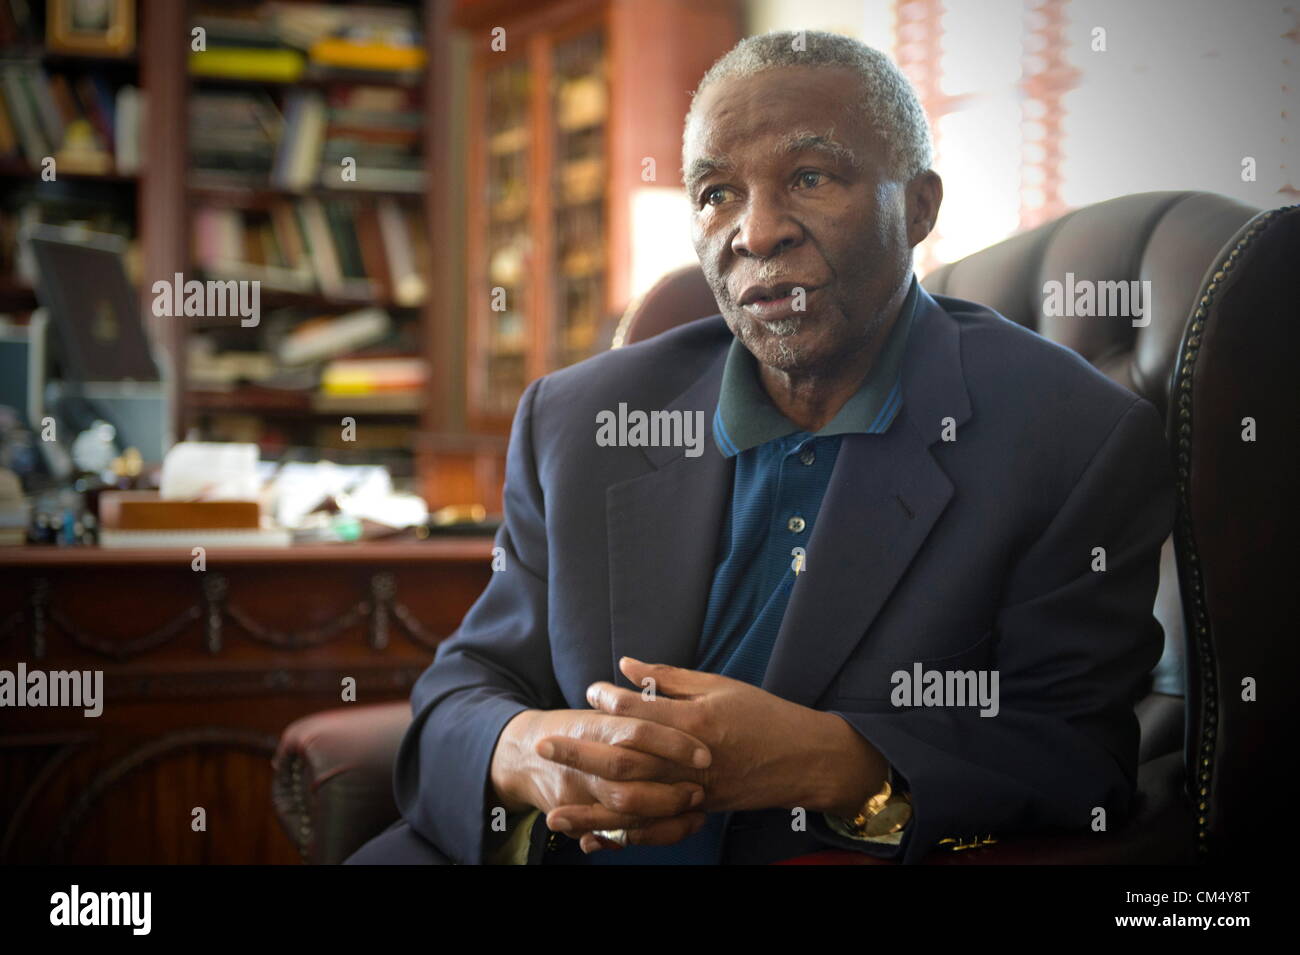 JOHANNESBURG, SOUTH AFRICA: Former South African president Thabo MBeki talks about South Africa's roll in the development of the continent at his home on October 4, 2012 in Johannesburg, South Africa. (Photo by Gallo Images / Foto24 / Nicolene Olckers) Stock Photo